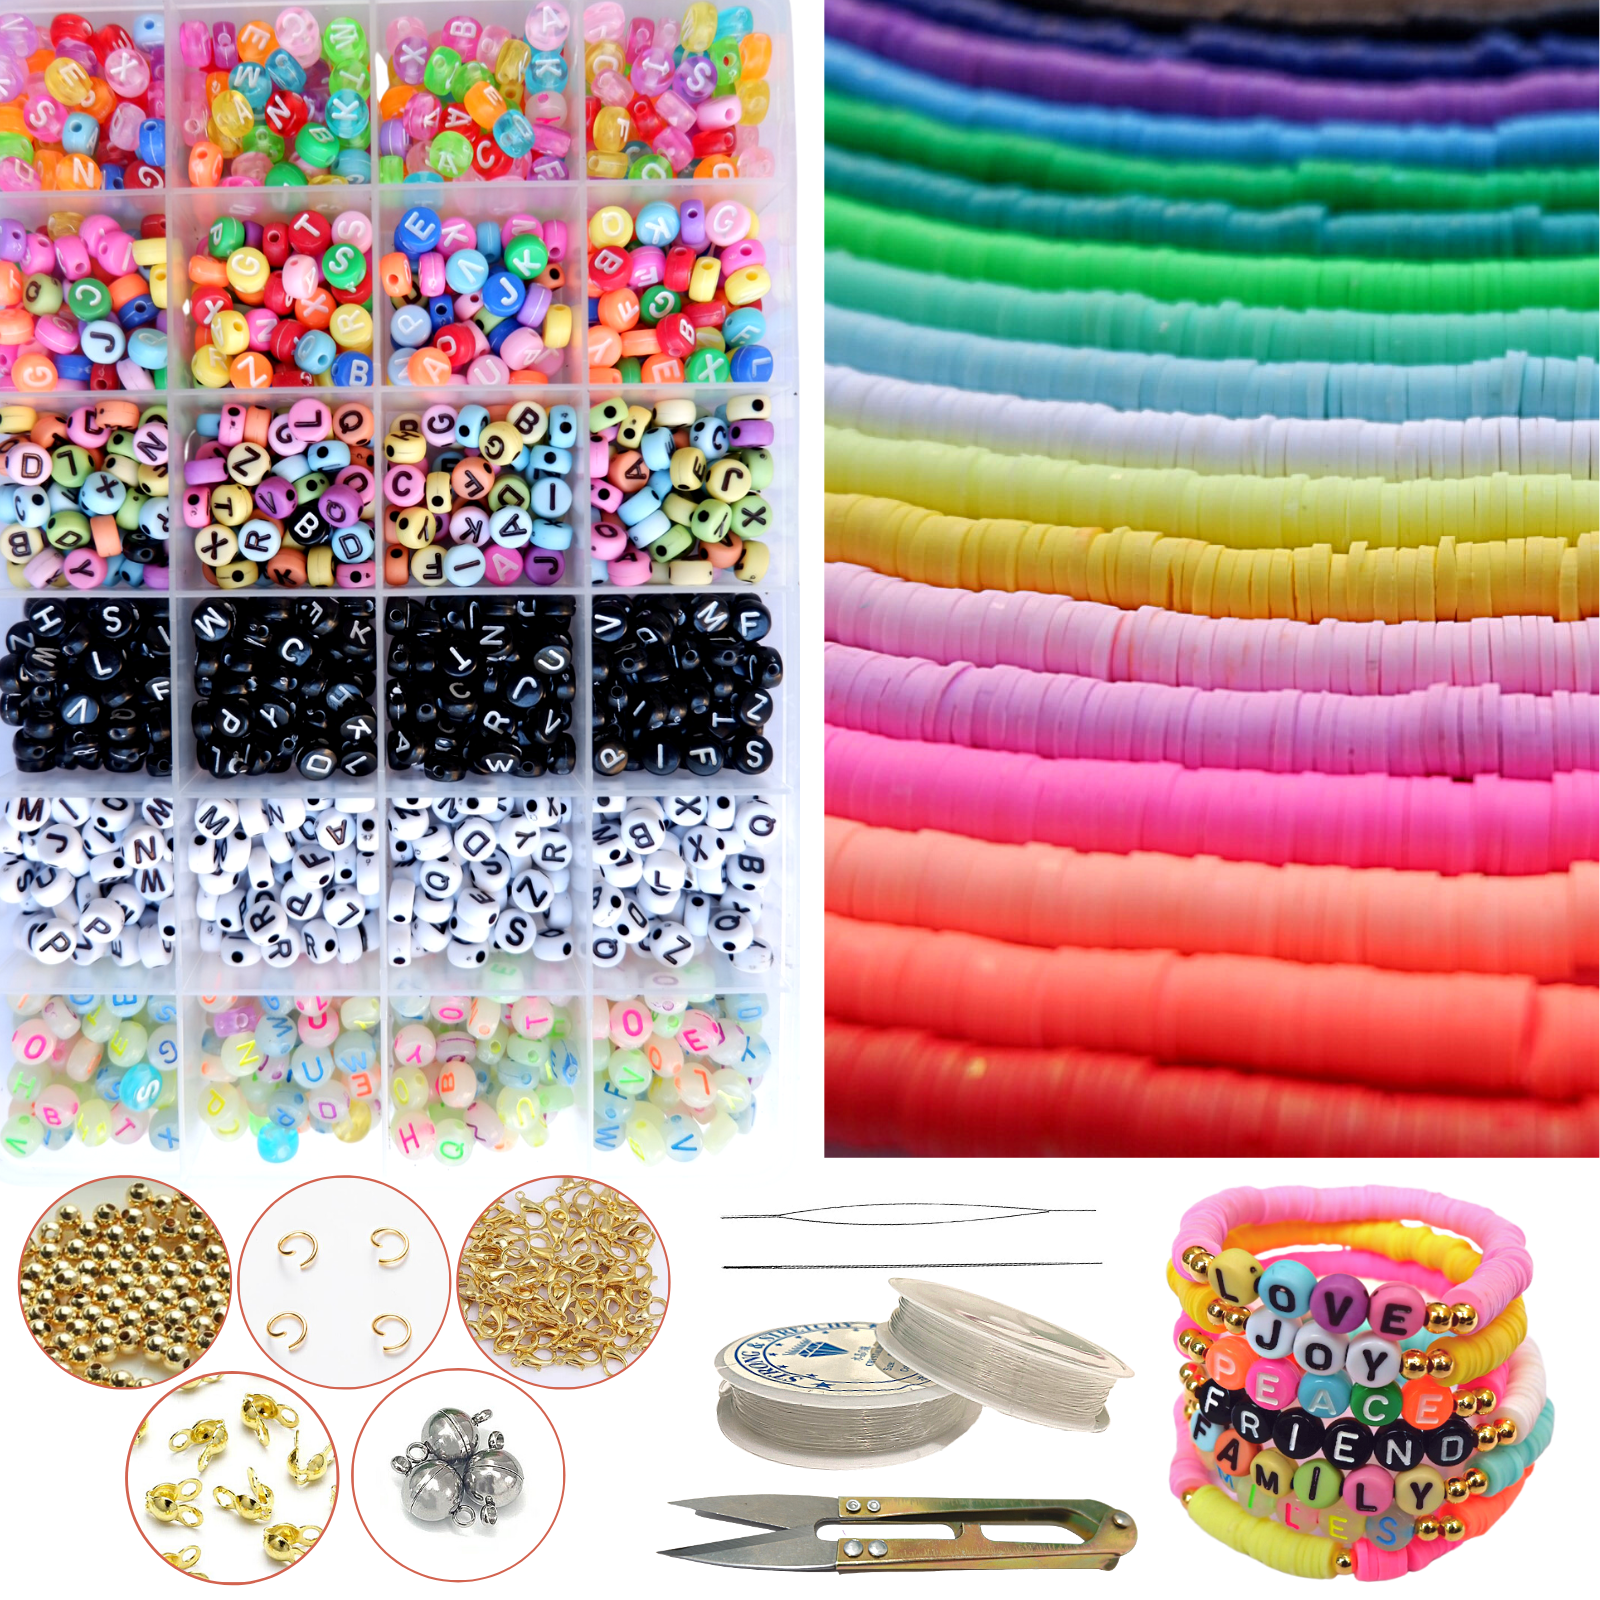 Jewelry Making Supplies Acrylic Beads 200 Count Unique Beads Light Weight Plastic Beads Kids Craft Supplies Bracelet Making